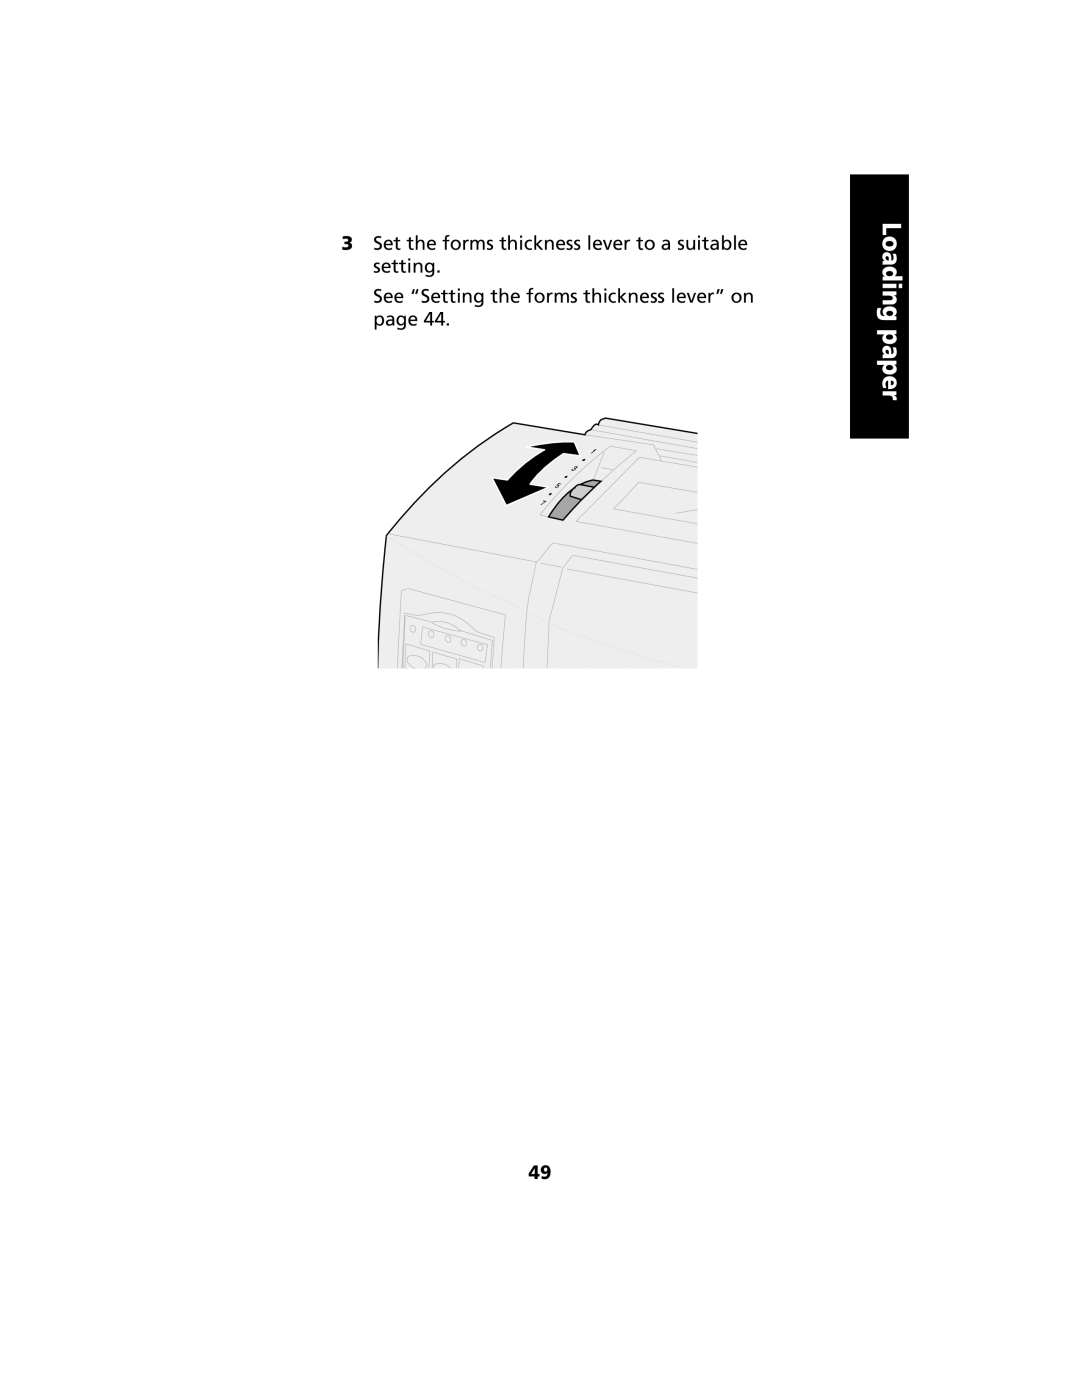 Lexmark 2480 manual Loading paper, Set the forms thickness lever to a suitable setting 